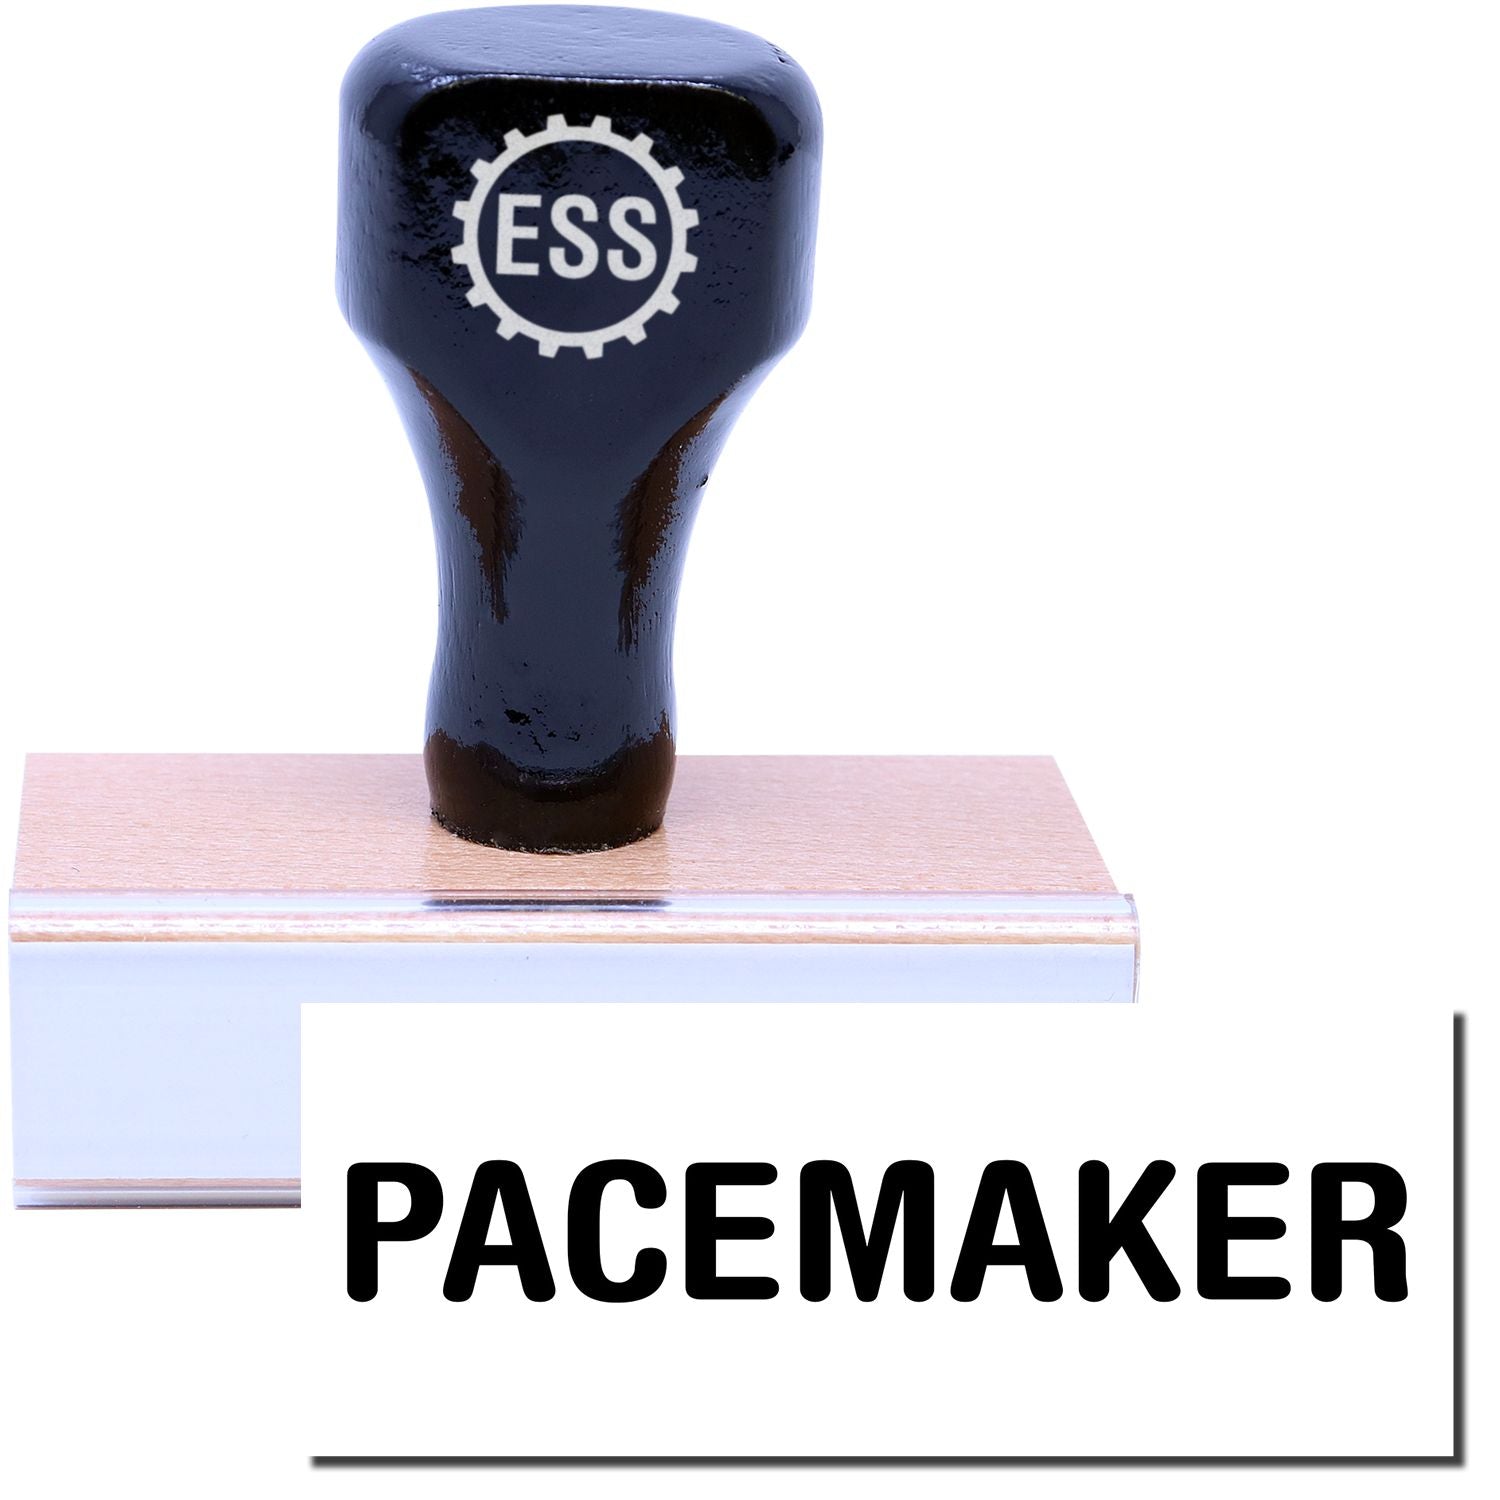 A stock office rubber stamp with a stamped image showing how the text "PACEMAKER" in a large font is displayed after stamping.